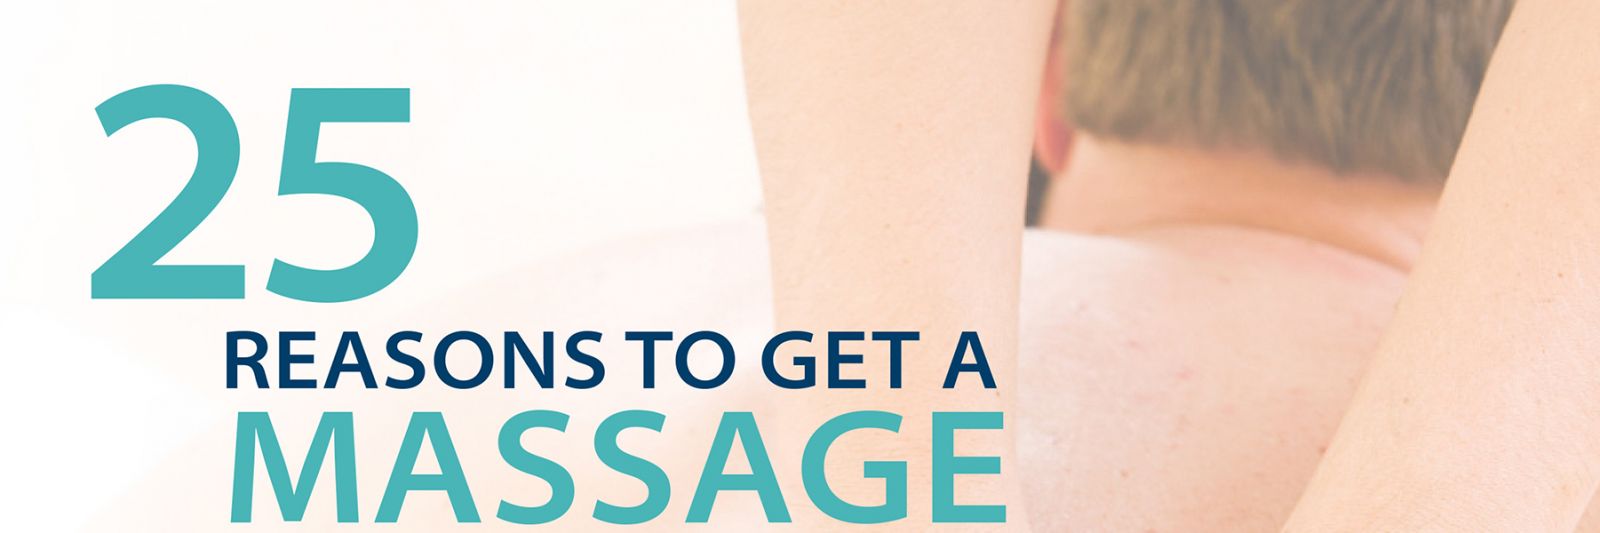 25 Reasons to get a massage